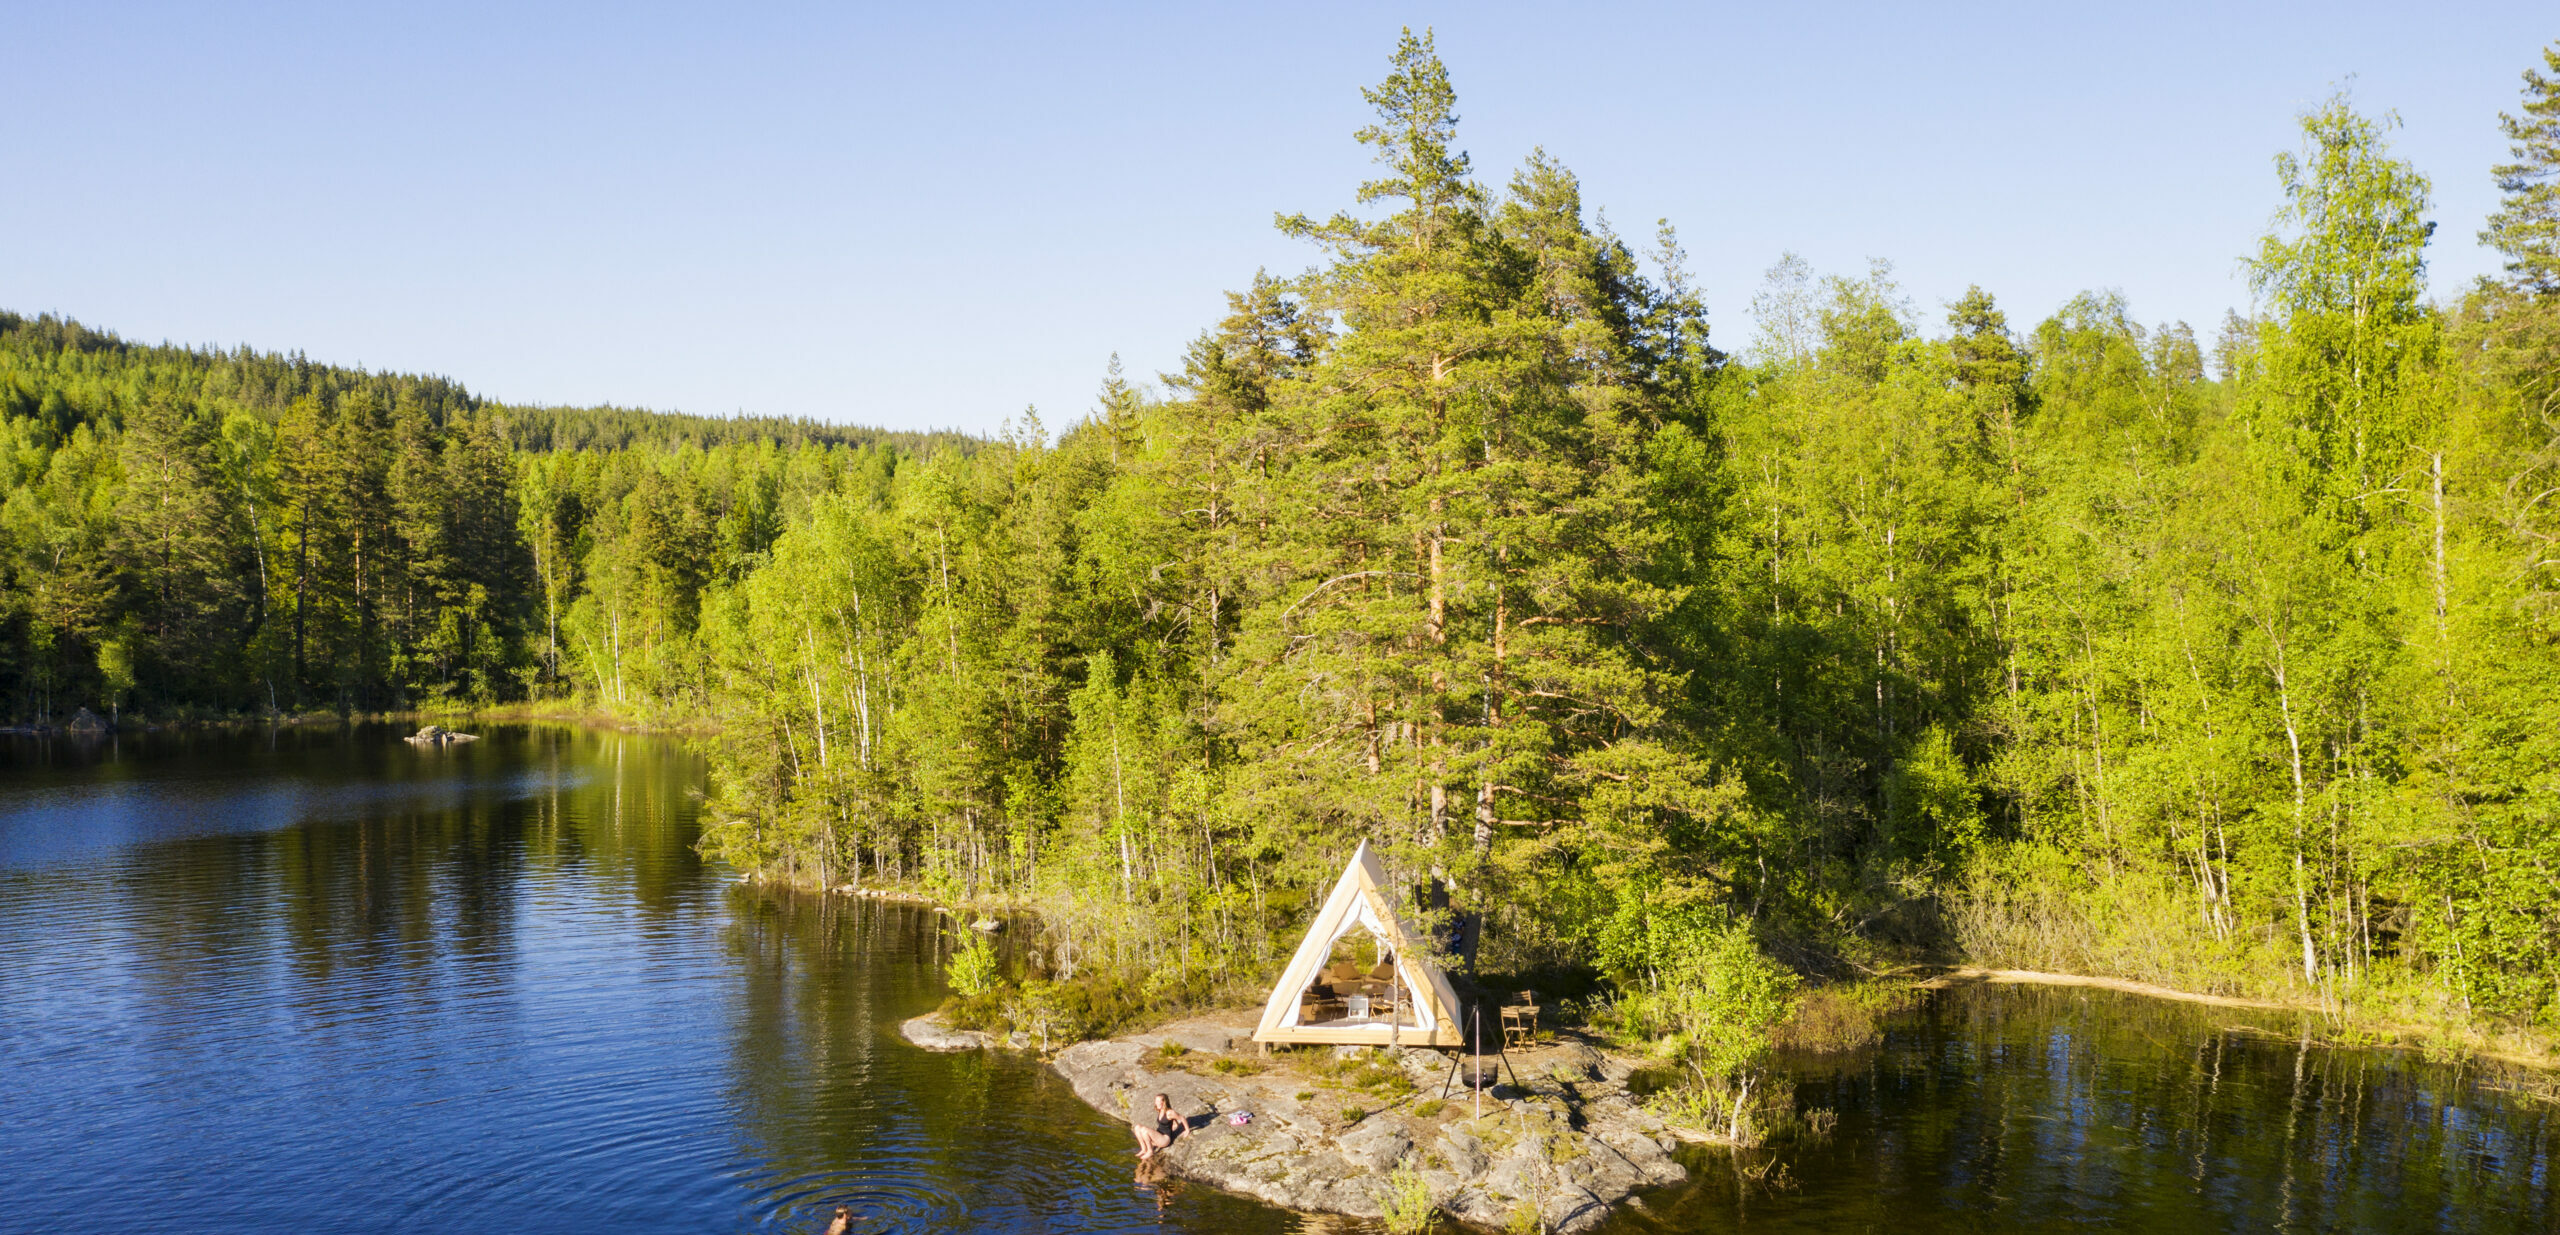 Södra partners with Happie Nation to devop close–to–nature tourism